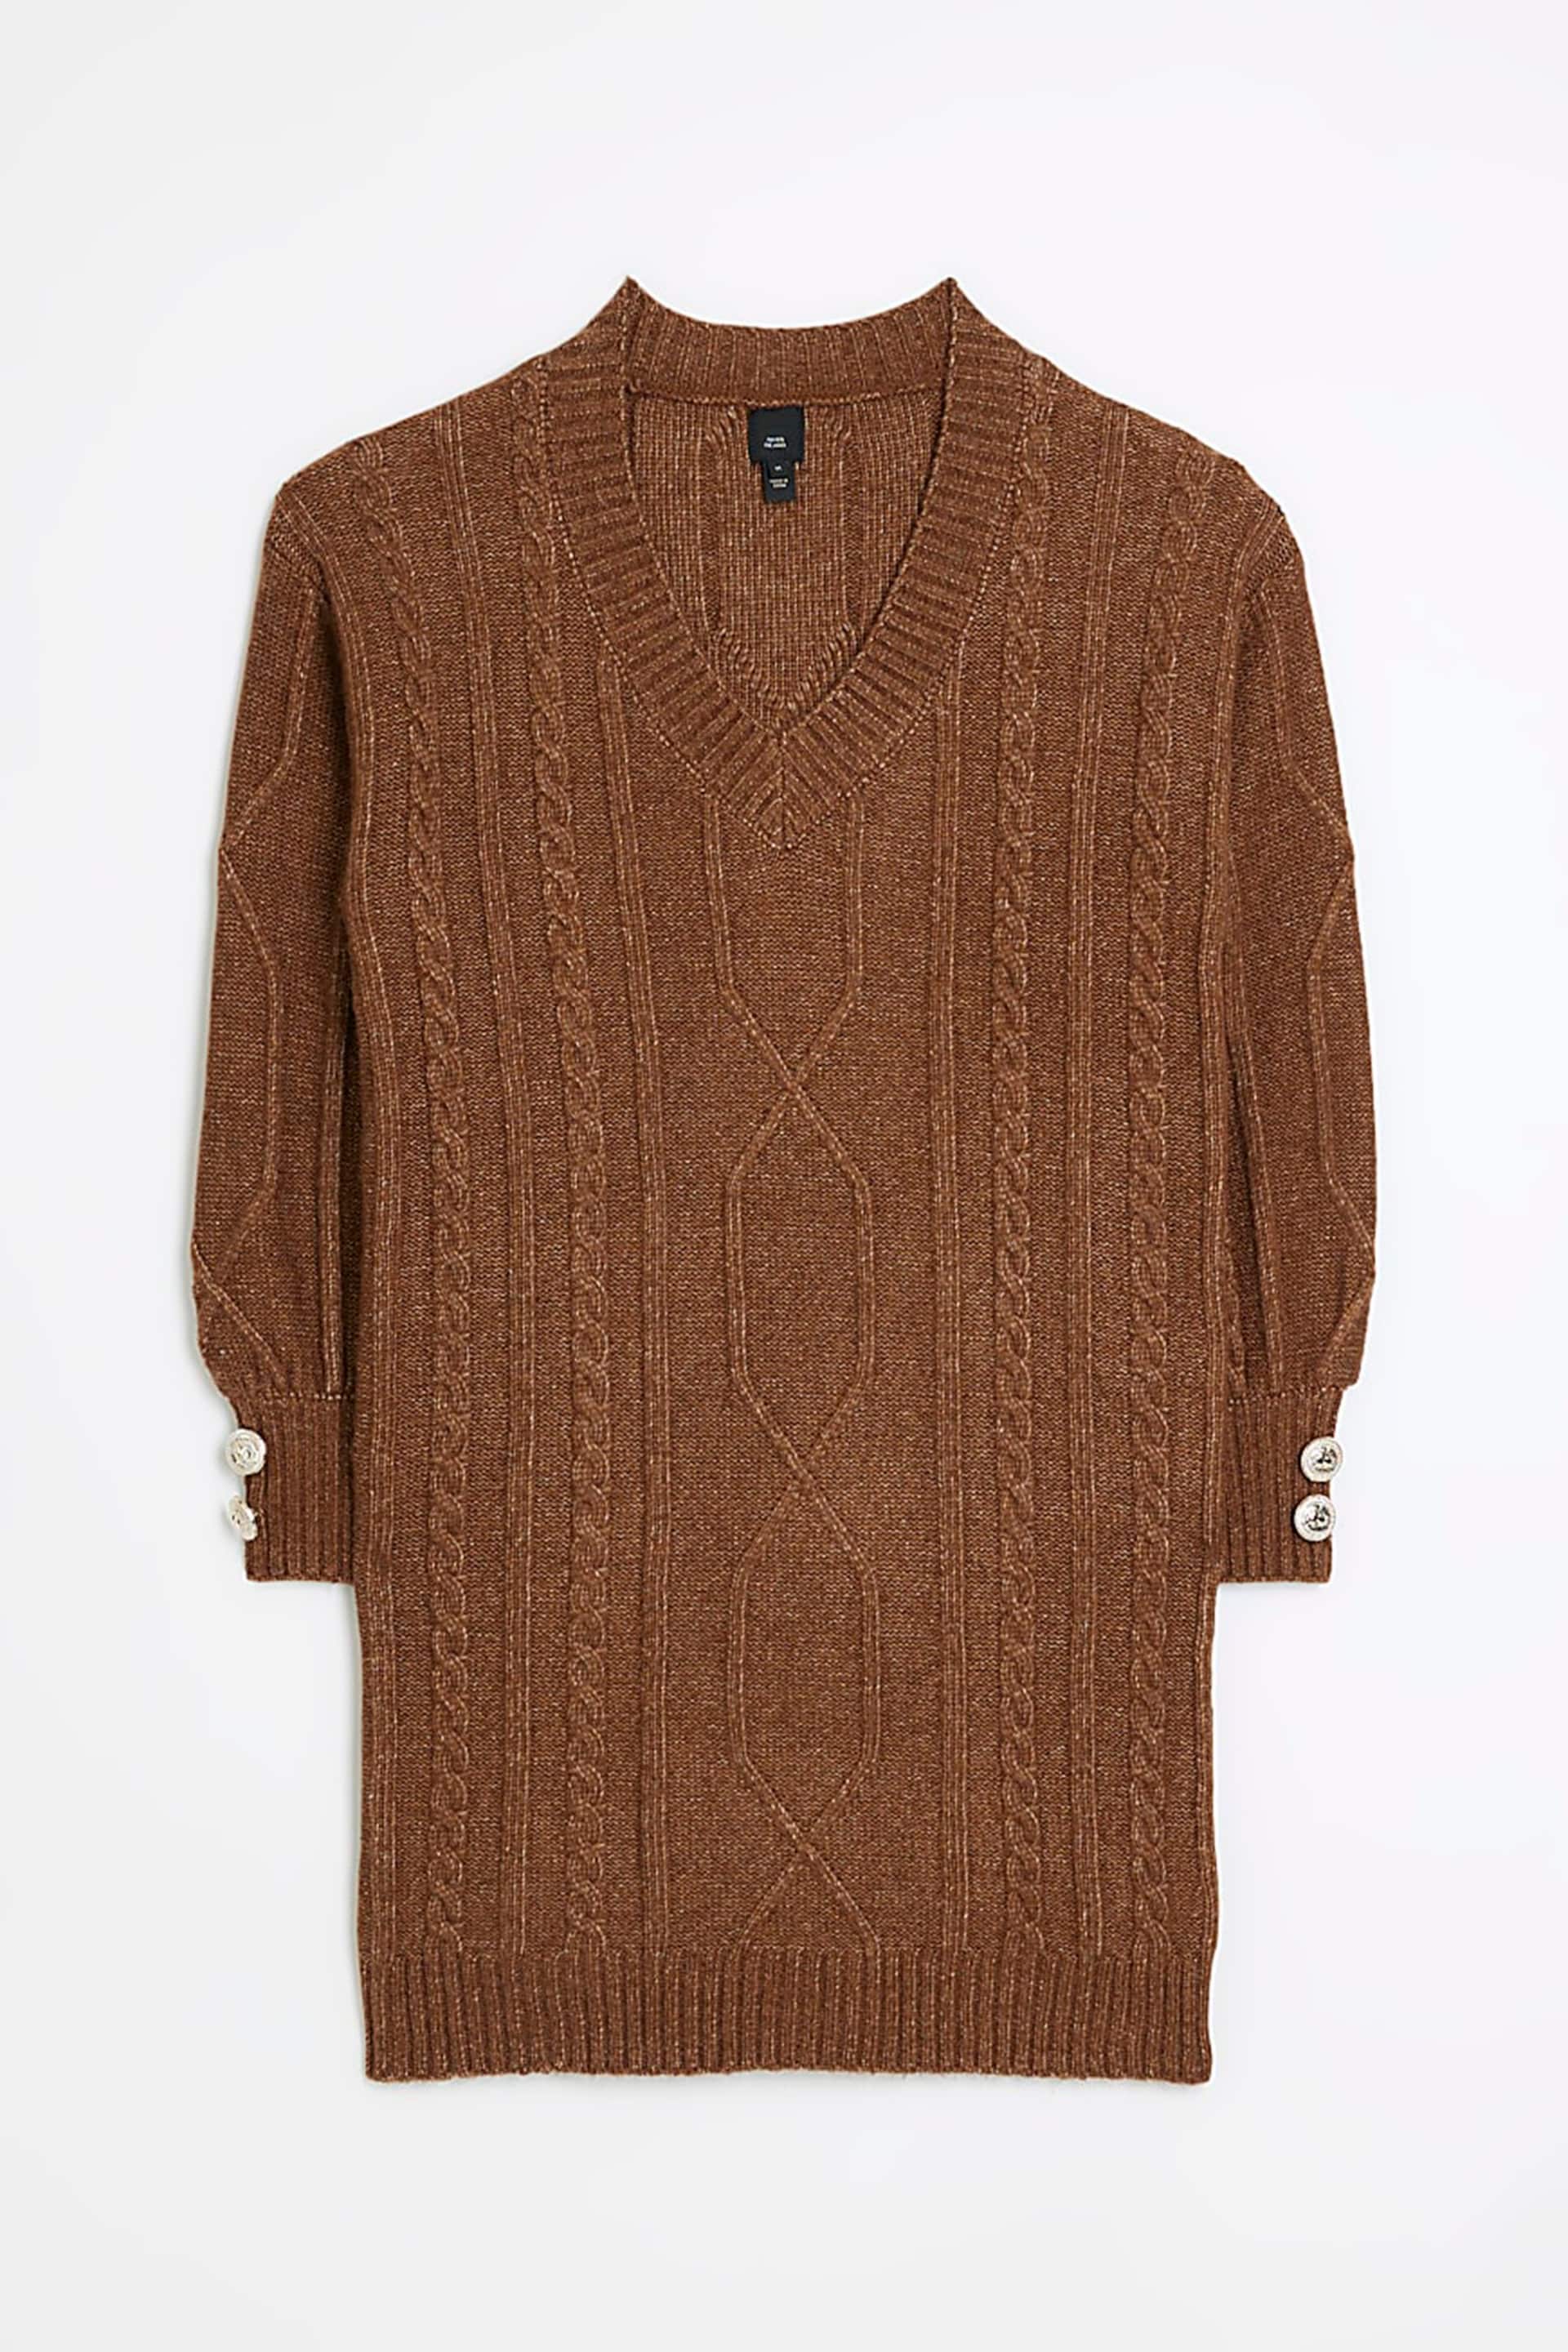 River Island Brown Cable Mini Jumper Dress - Image 5 of 5